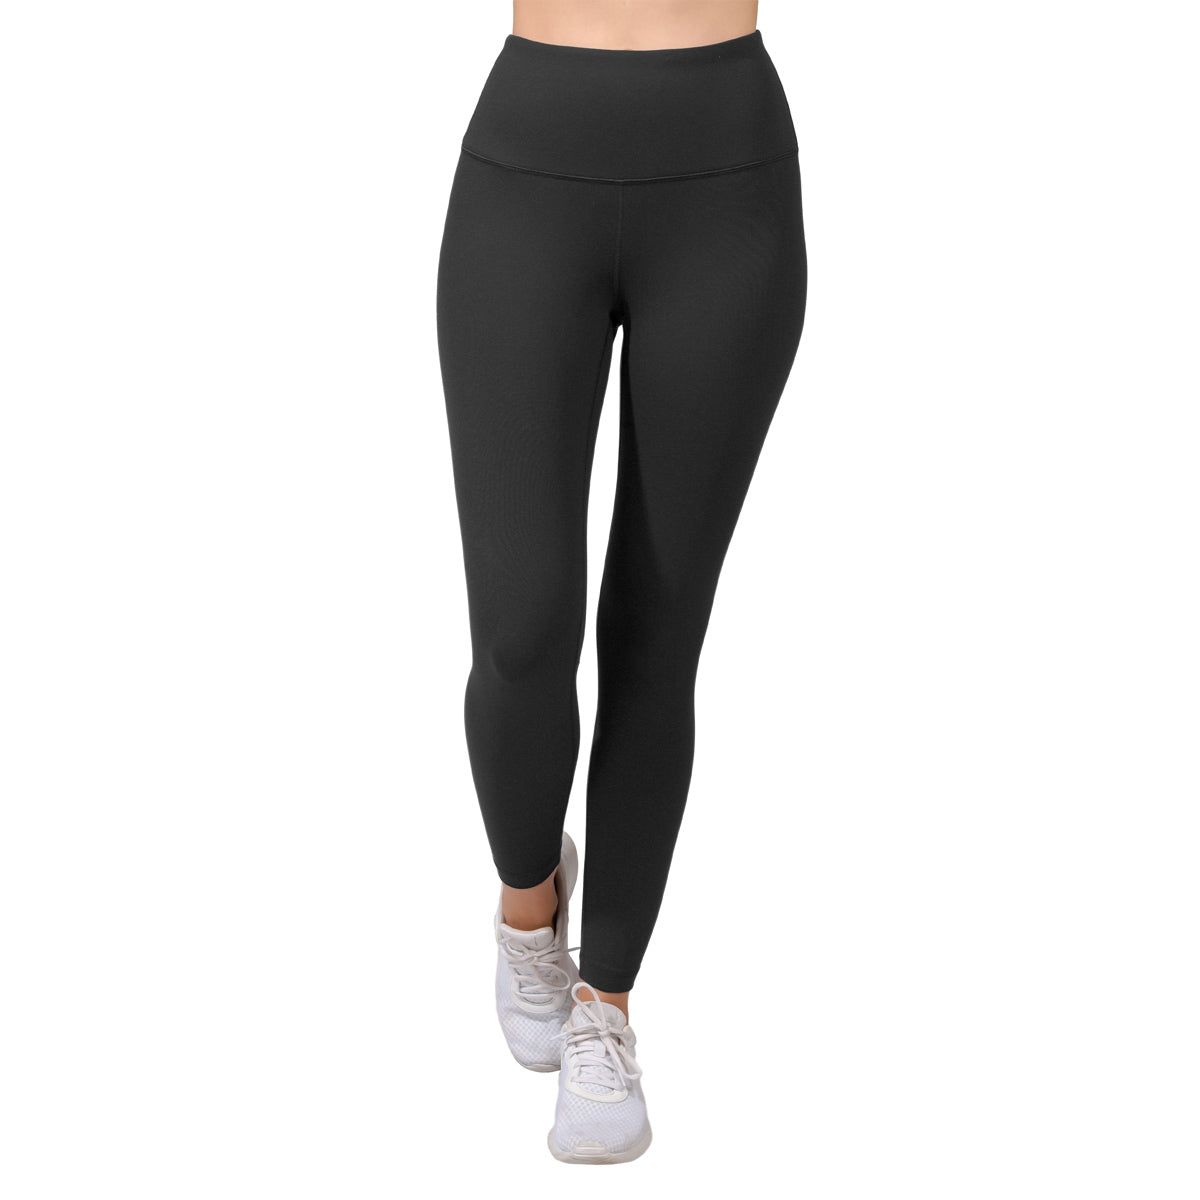 Buy 90 Degree By Reflex Women's High Waist Athletic Leggings with